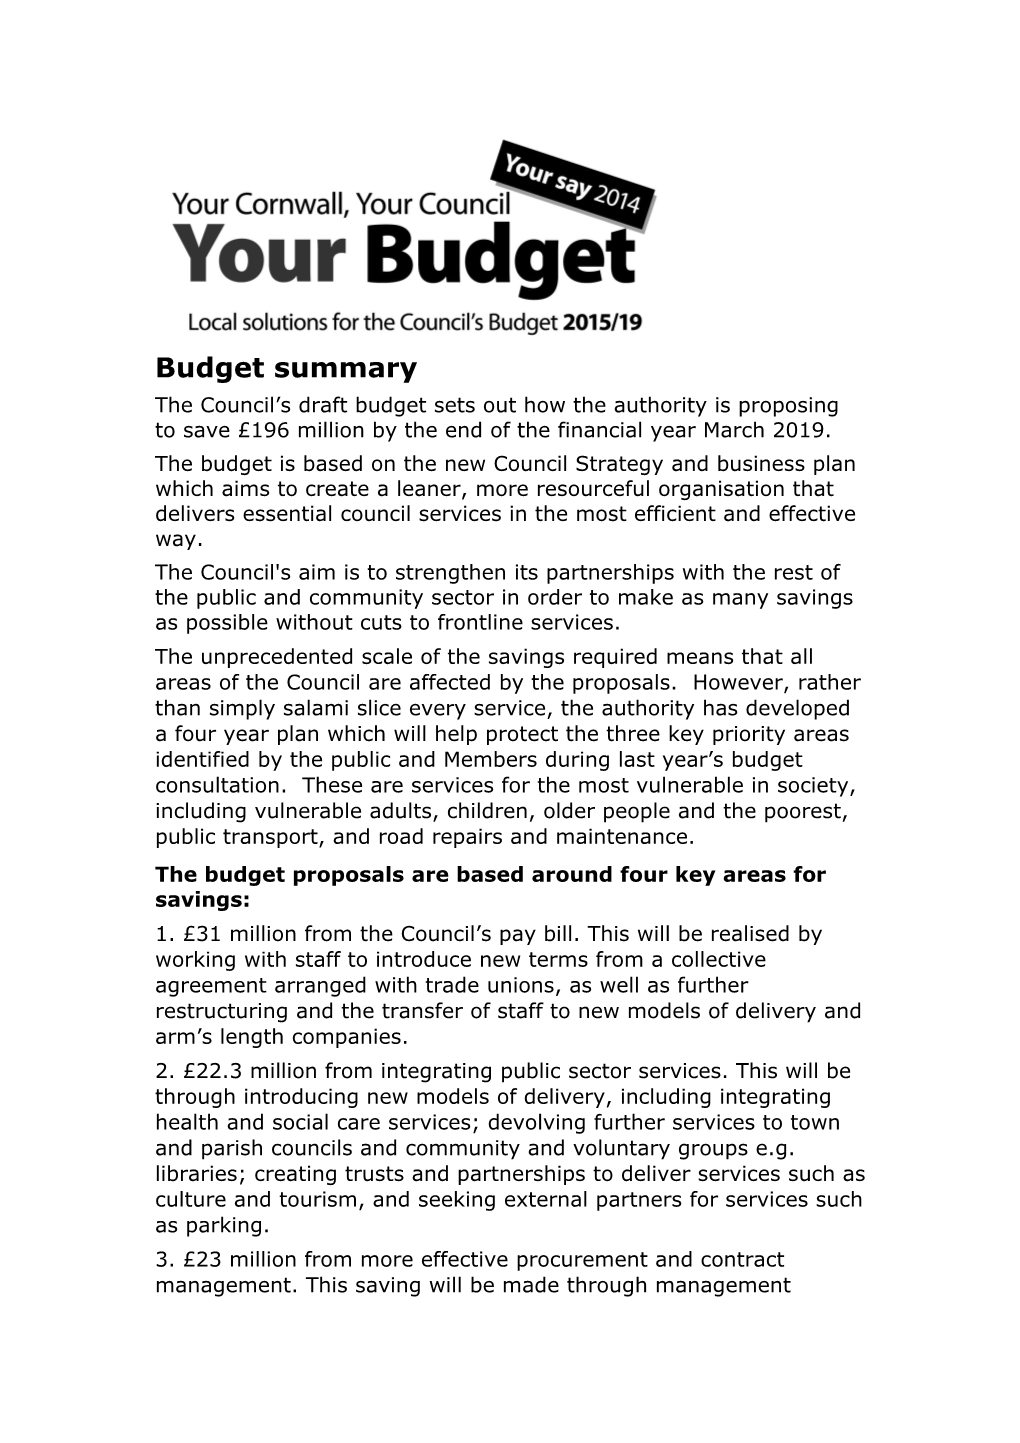 The Budget Proposals Are Based Around Four Key Areas for Savings